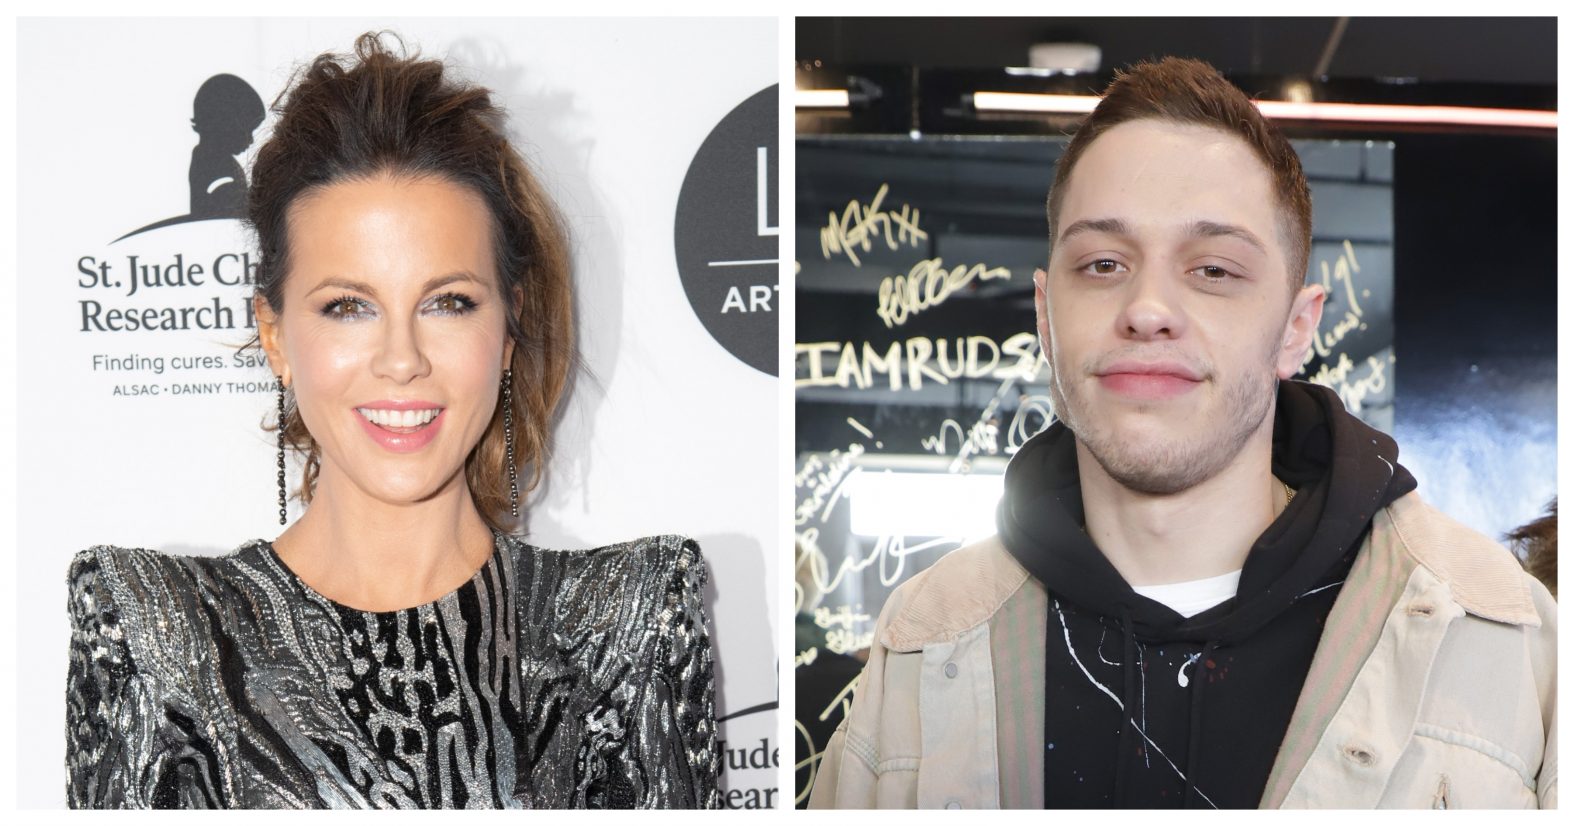 Pete Davidson and Kate Beckinsale Don't Care About Difference